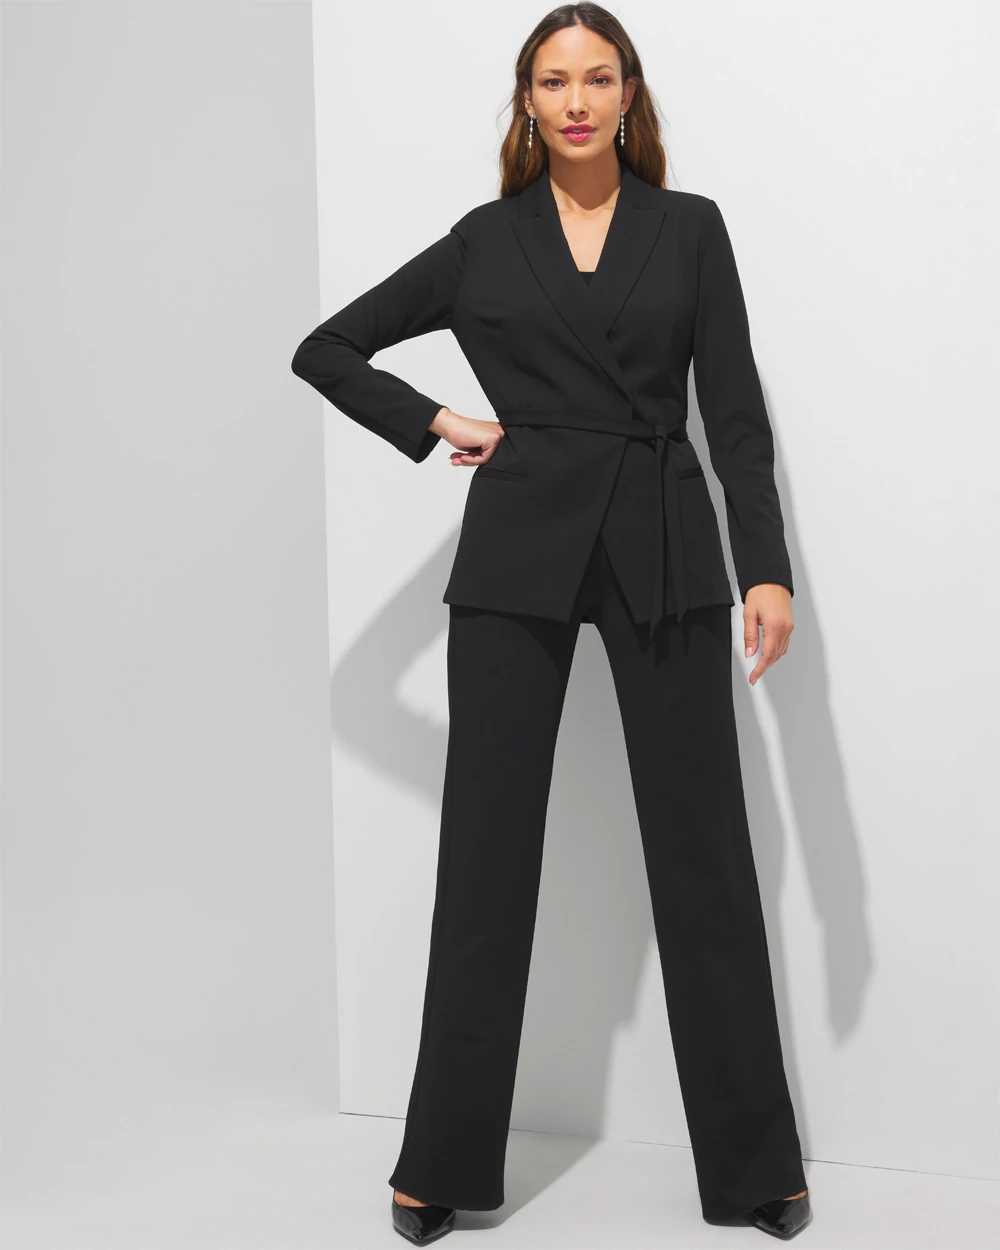 Outlet WHBM Relaxed Belted Blazer click to view larger image.